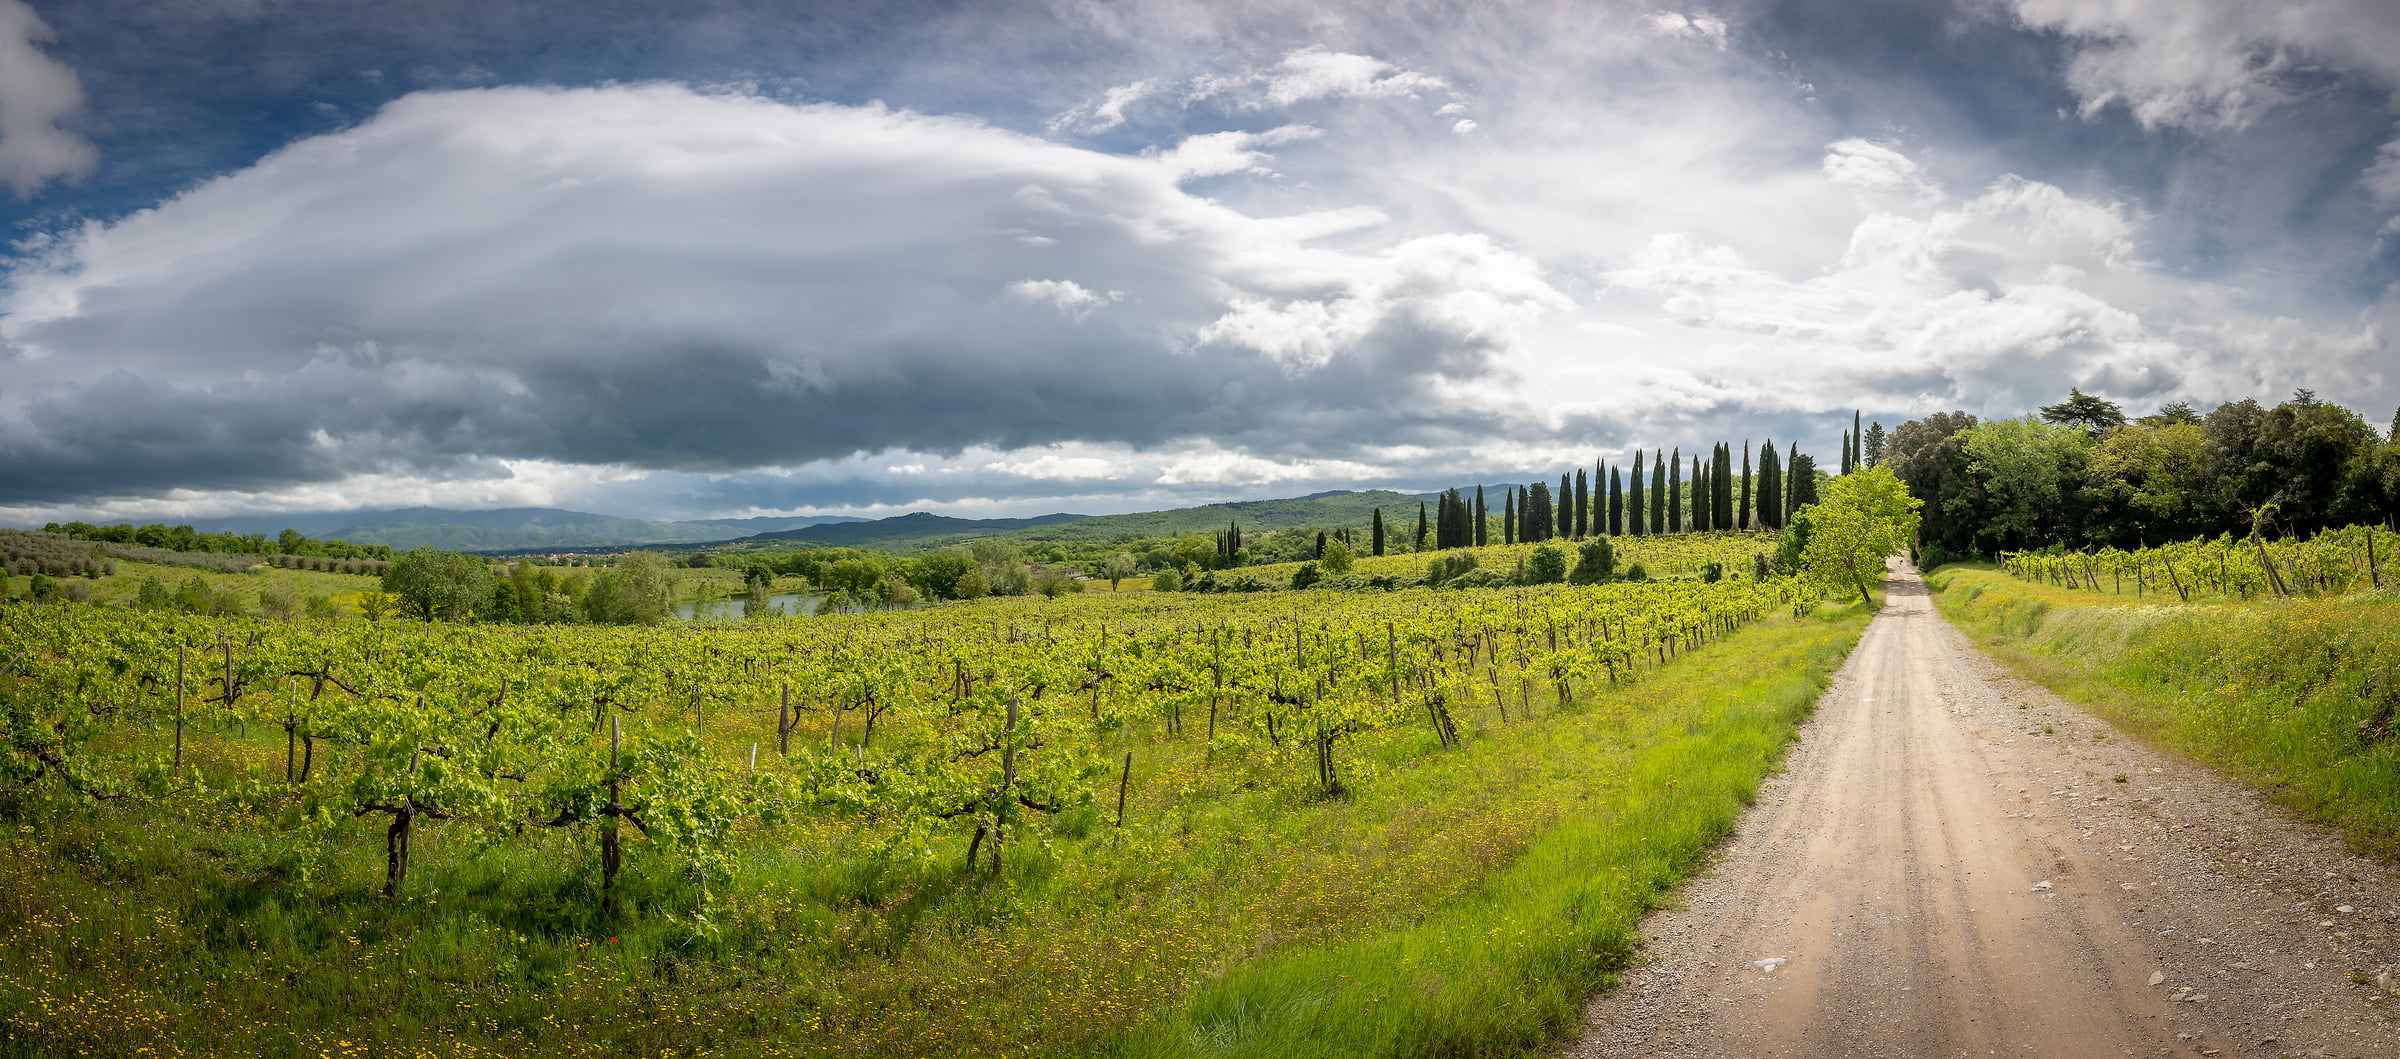 133 megapixels! A very high resolution, large-format VAST photo print of a dirt road next to a vinyard in Tuscany, Italy; photograph created by Justin Katz in Tenuta Lupinari, Tuscany, Italy